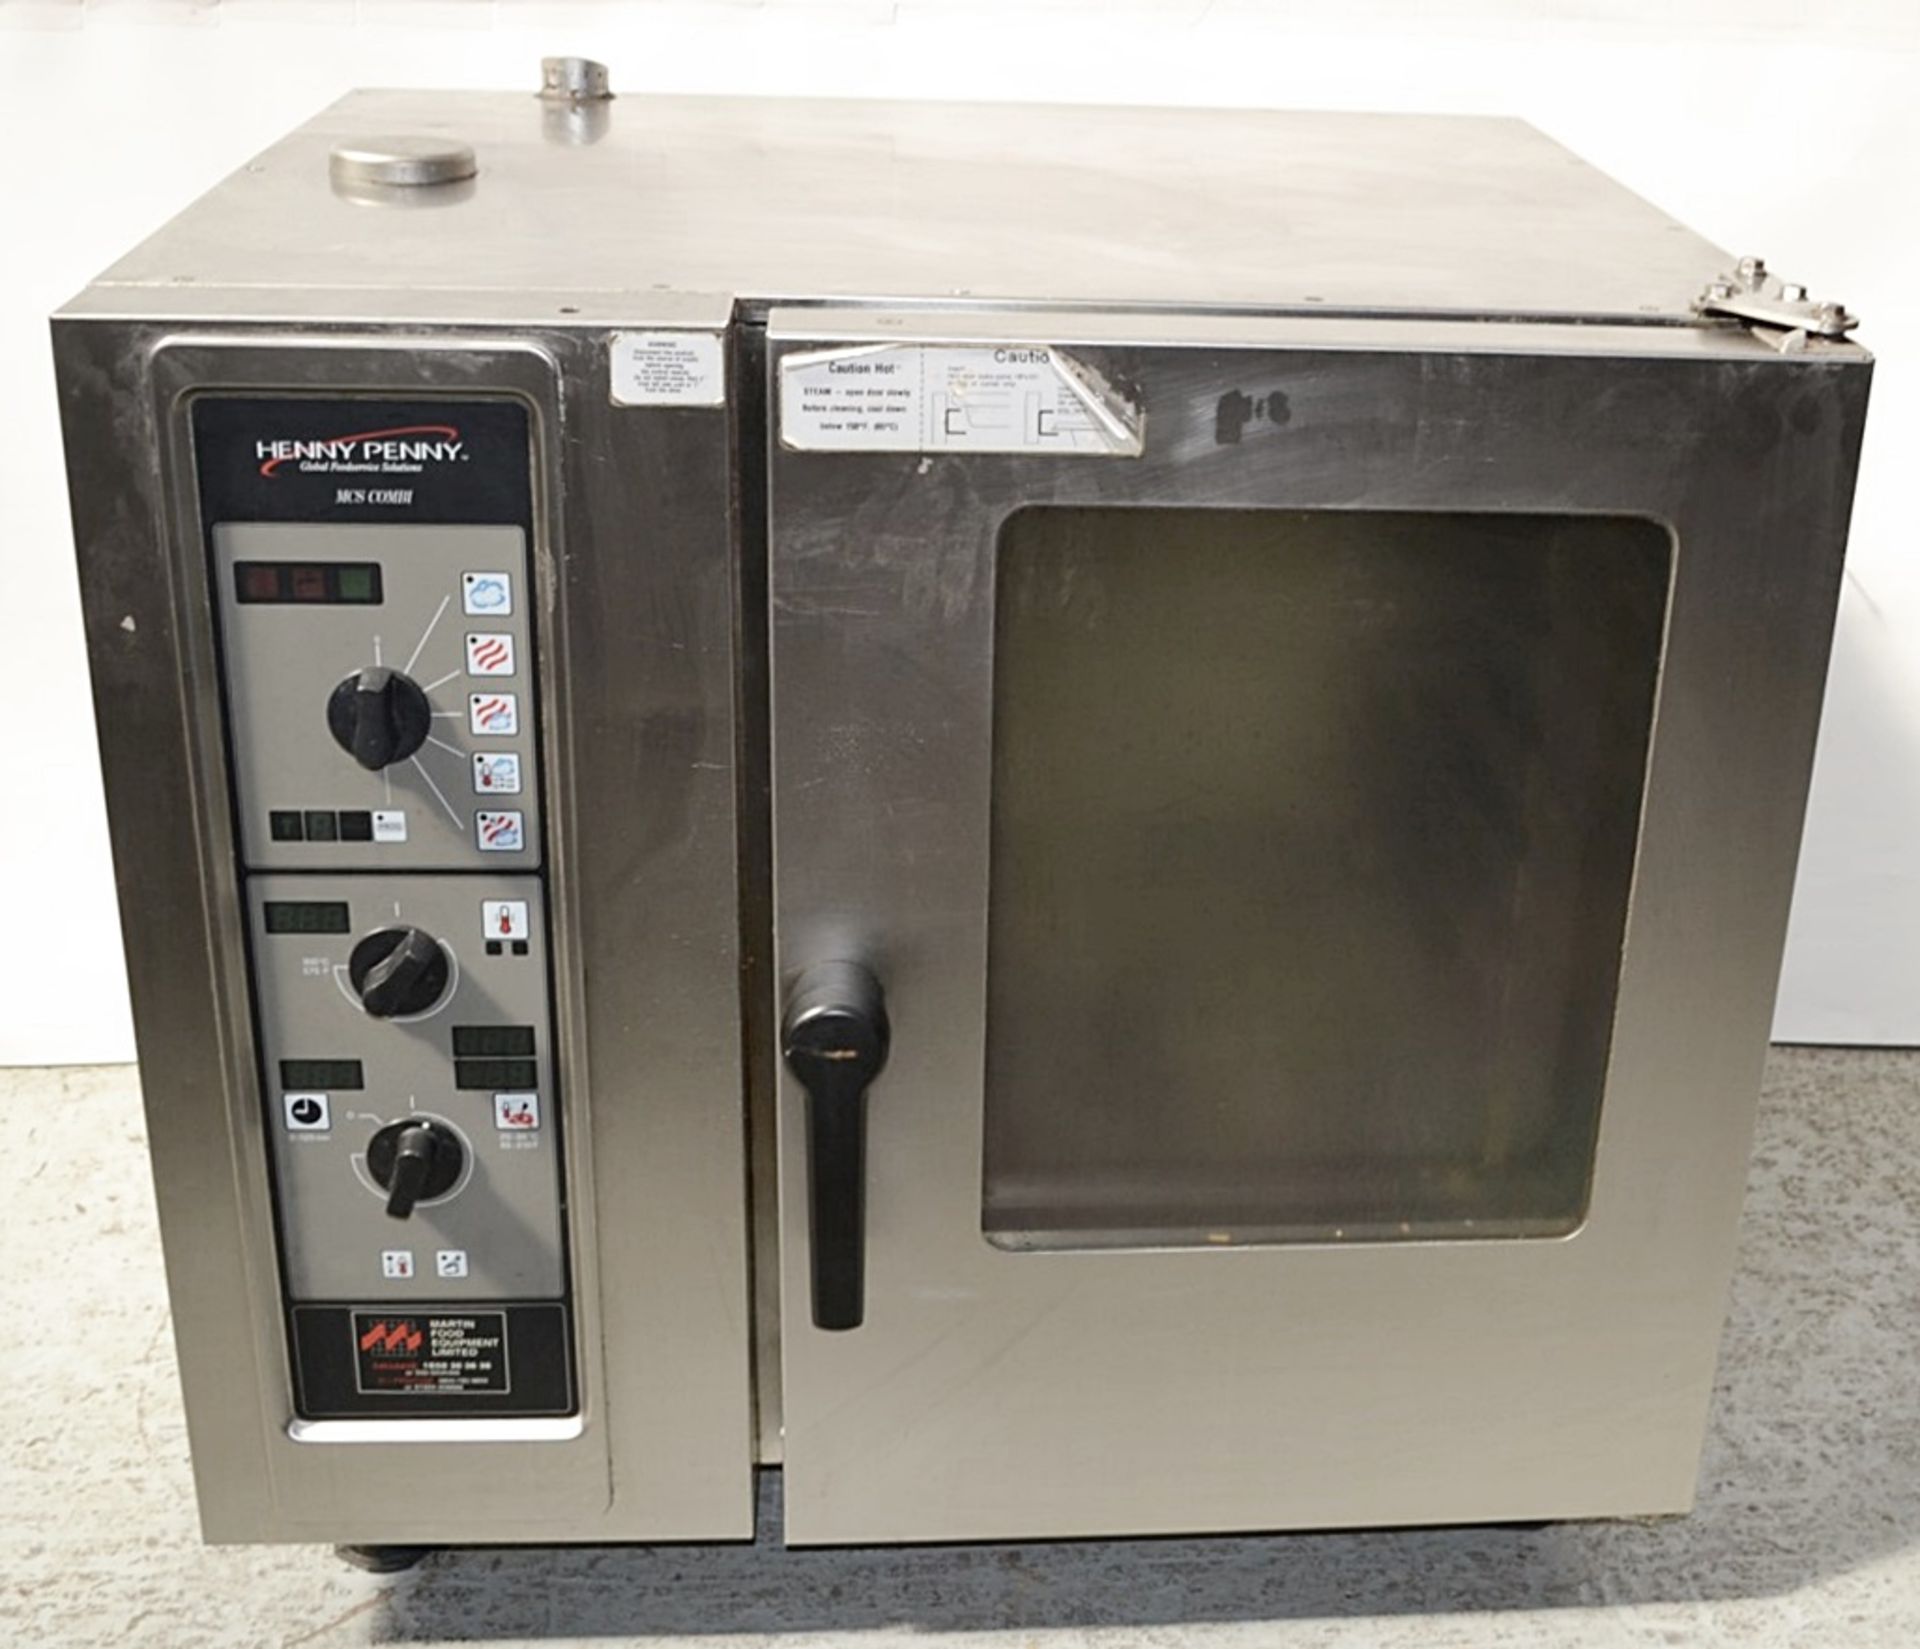 1 x Henny Penny Multifunction Commercial Combi Oven - Model: MCS6 - Commercial Catering Equipment In - Image 9 of 9